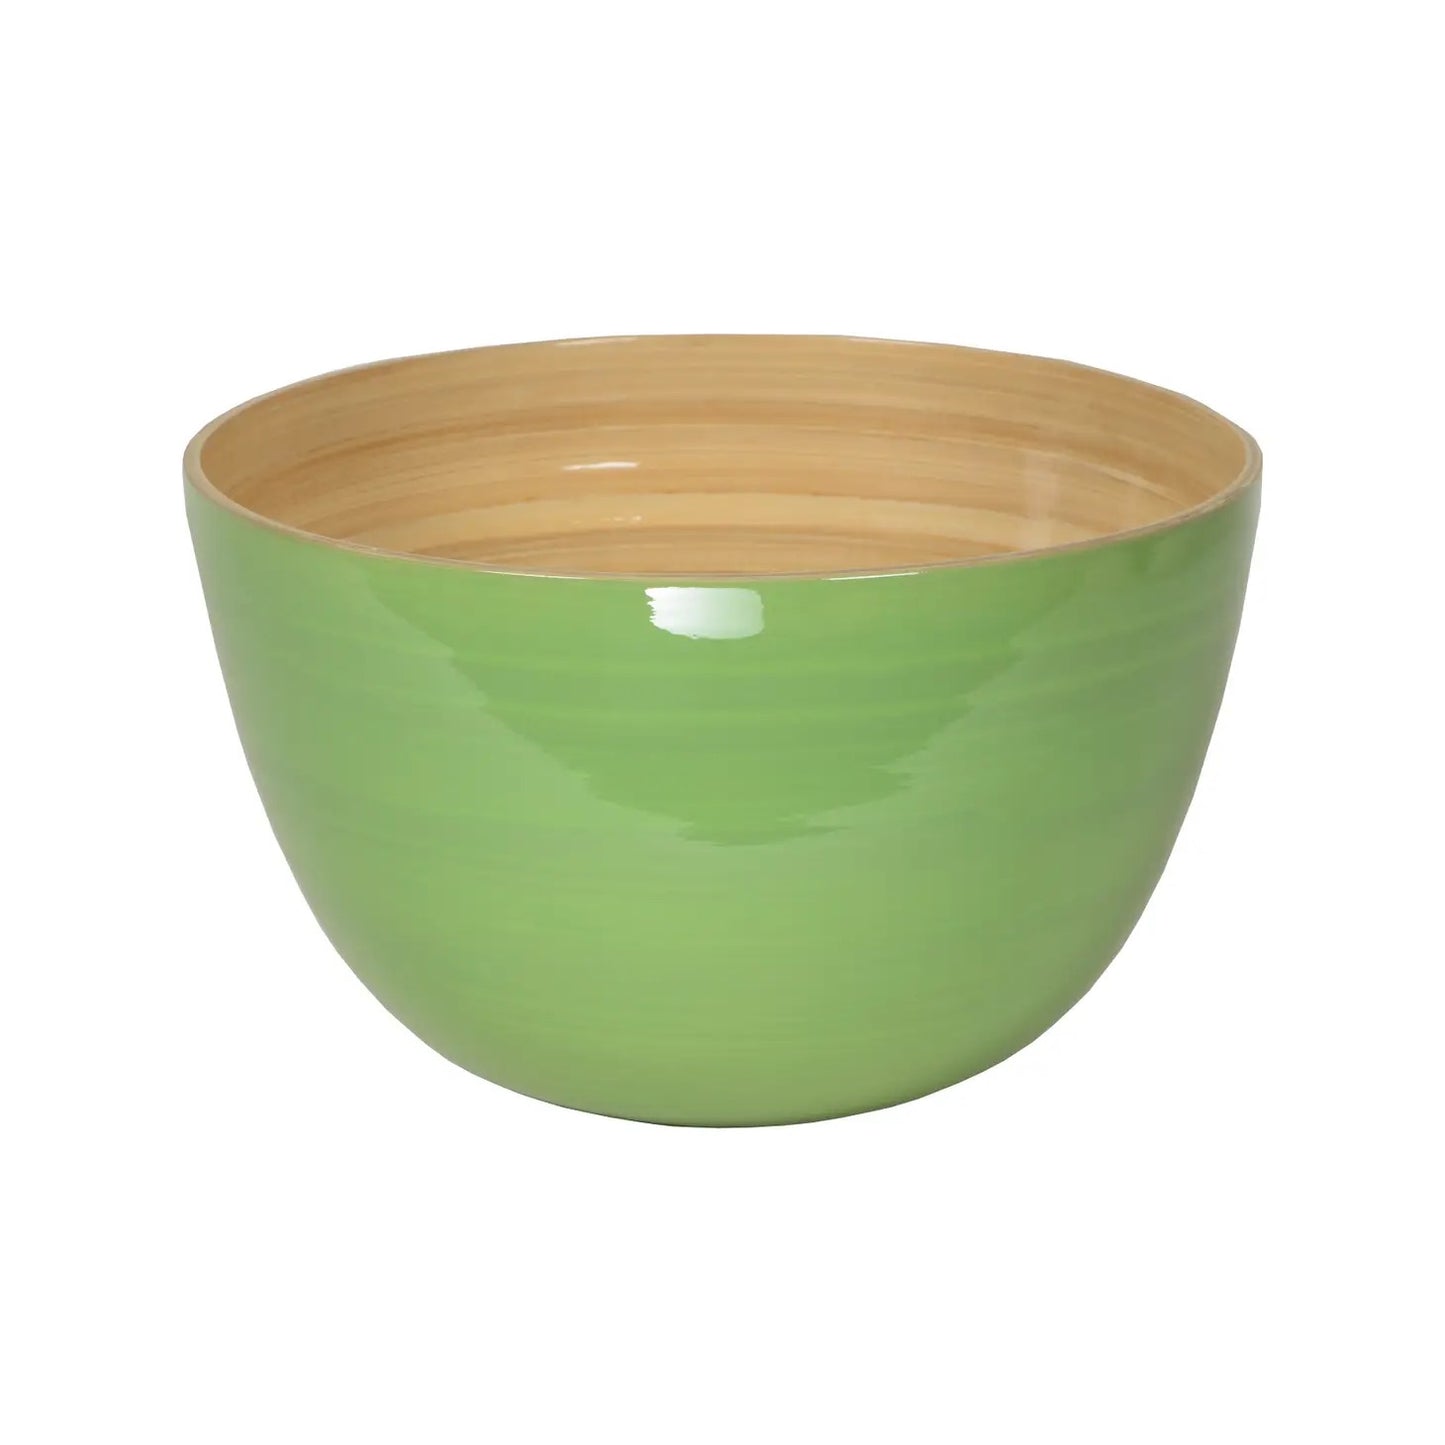 Lacquered Bamboo Bowls, 10.2" D x 6.2" H